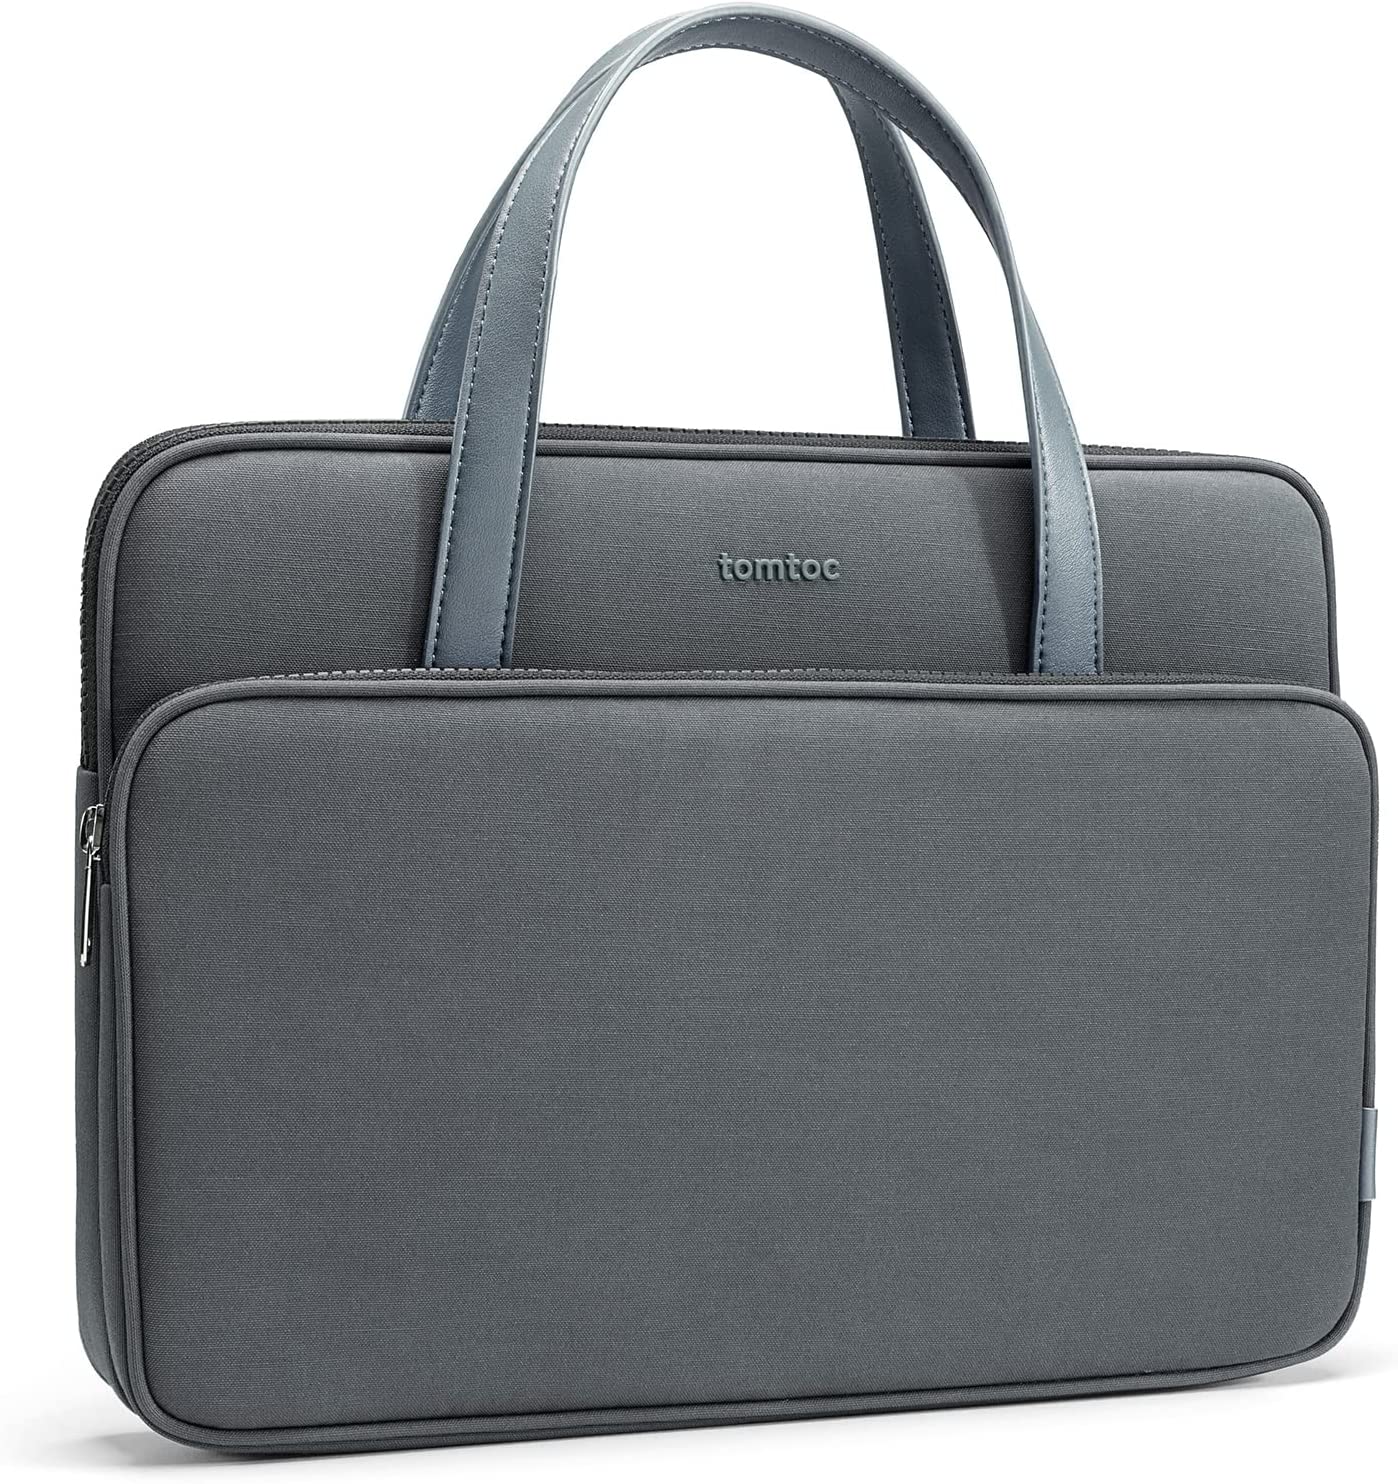 Tomtoc TheHer-H21 Laptop Handbag 14 inch - Gray